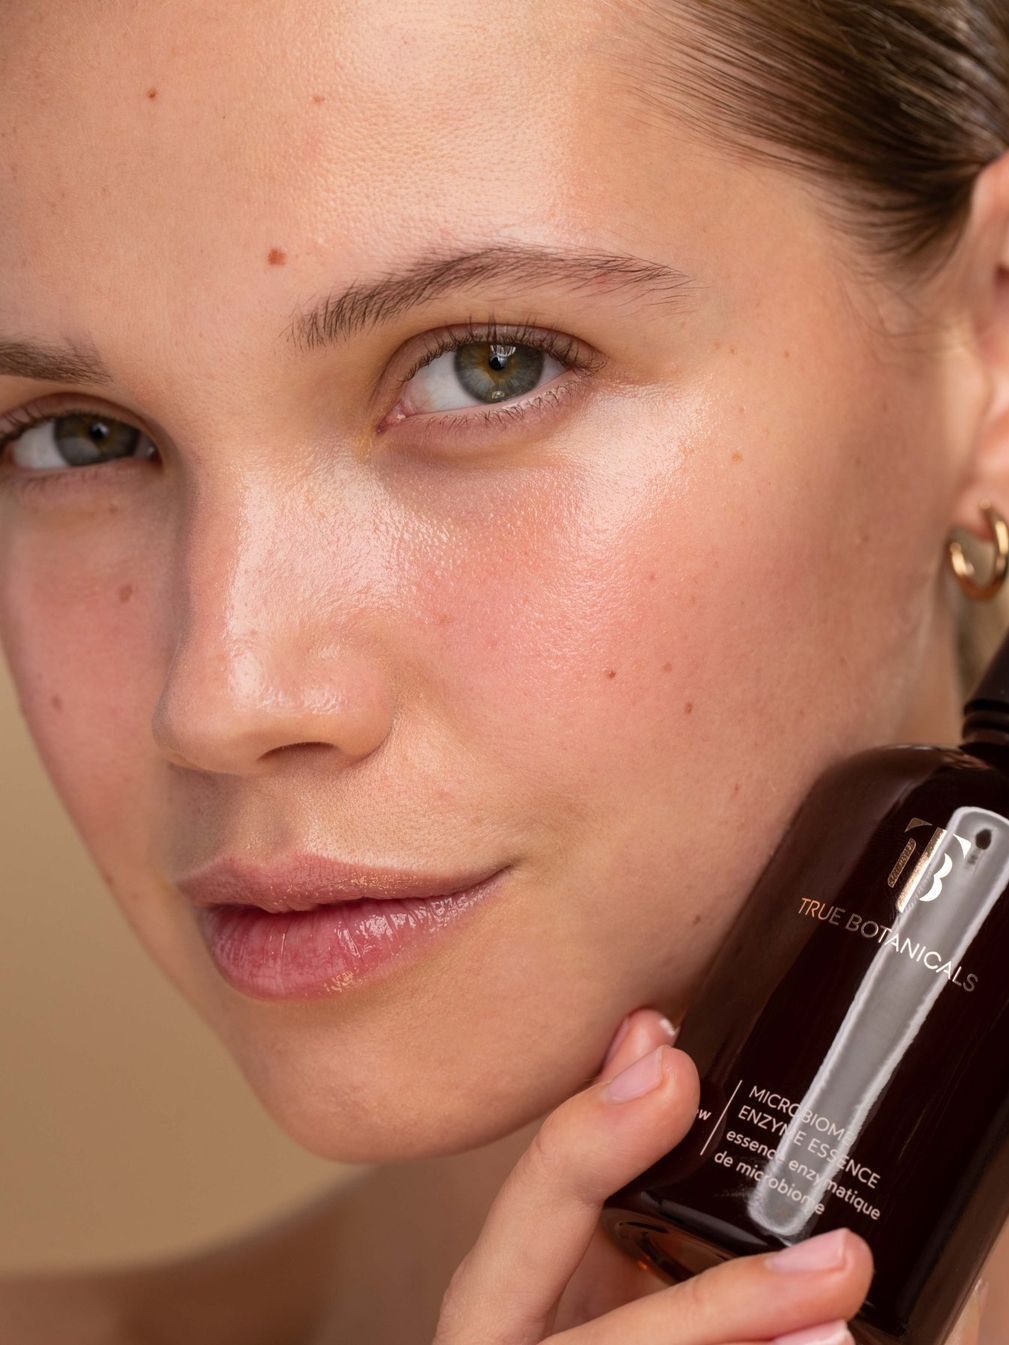 A close up of a woman holding a bottle of True Botanicals Microbiome Enzyme Essence.